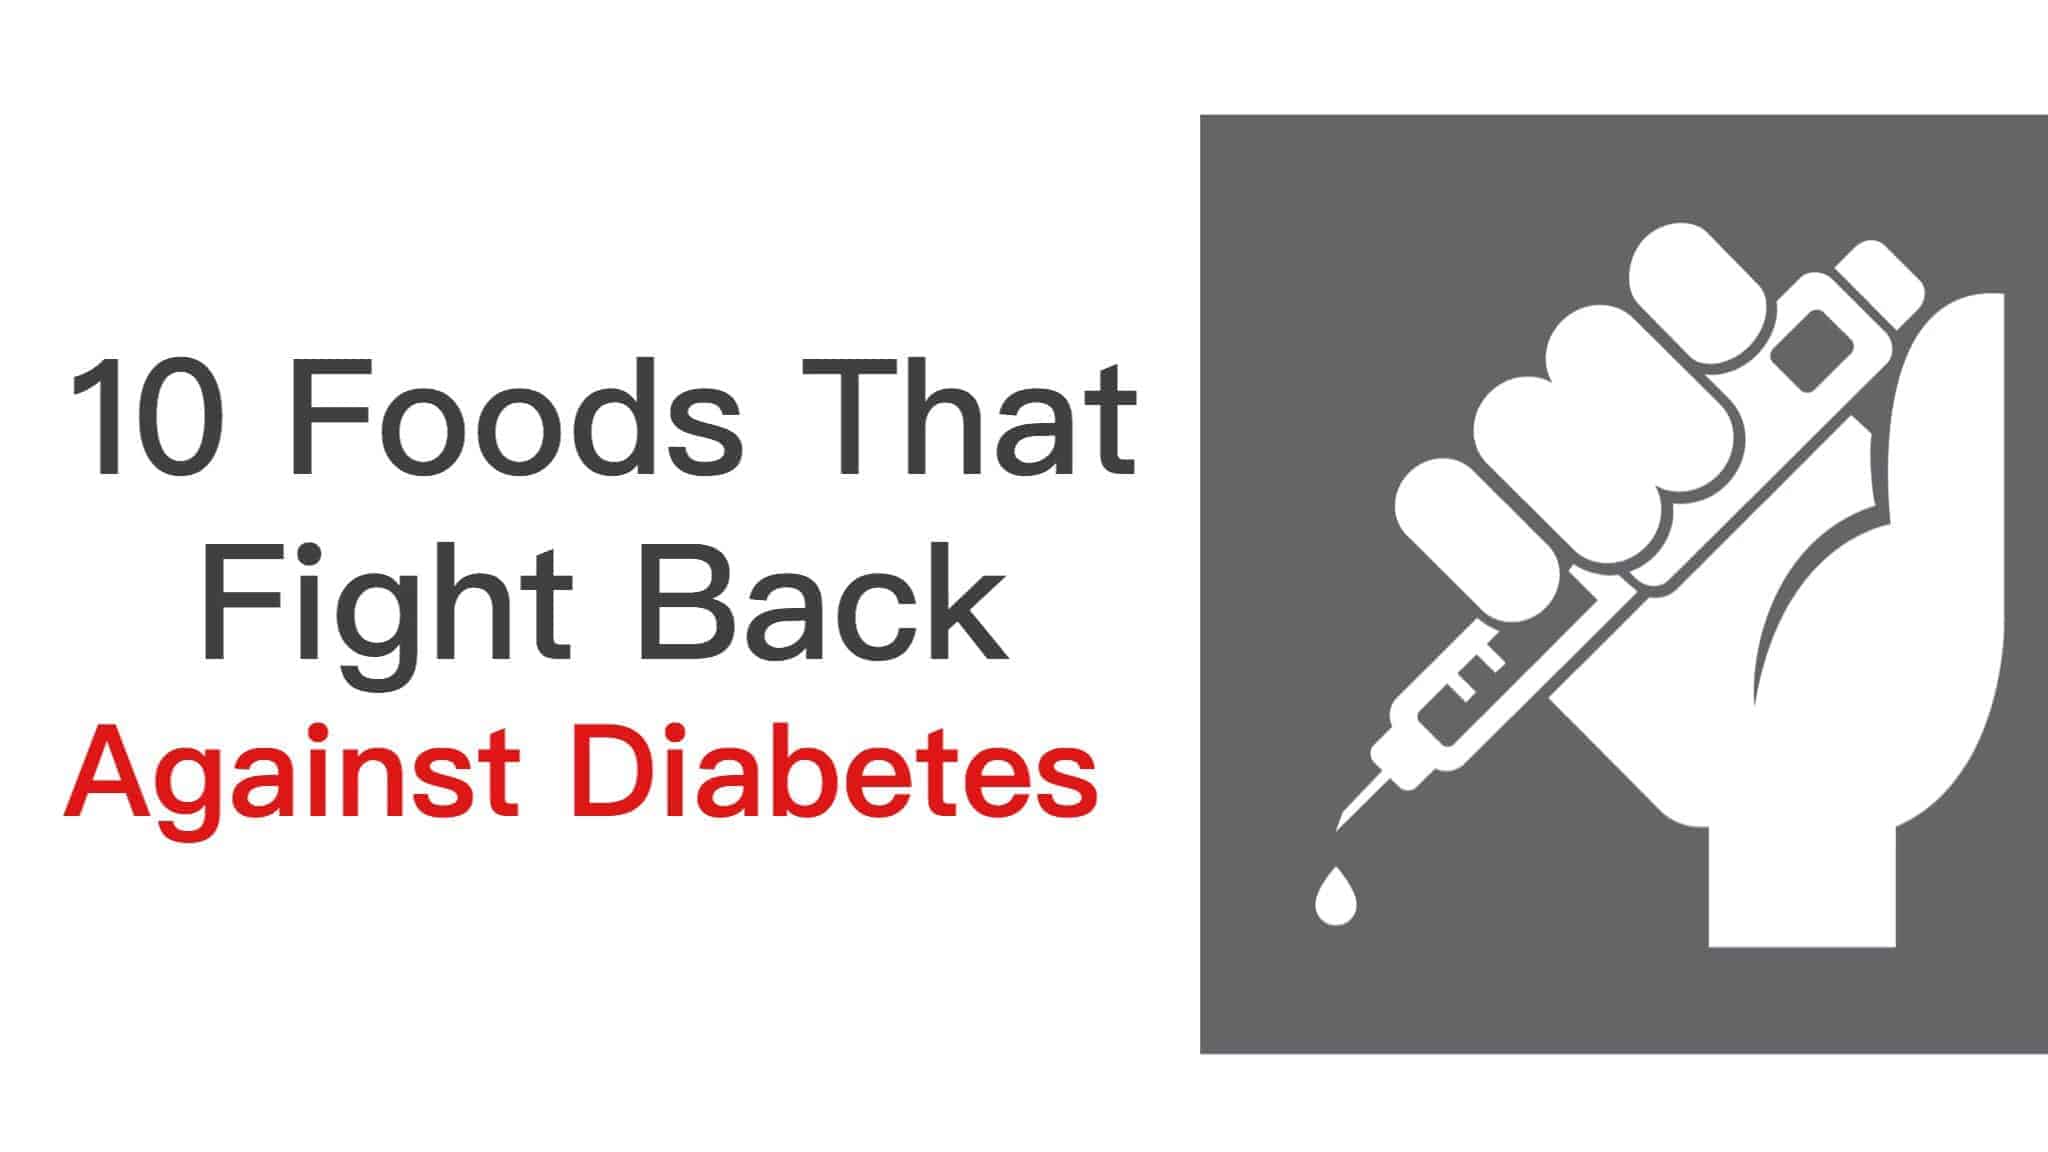 10 Foods That Fight Back Against Diabetes